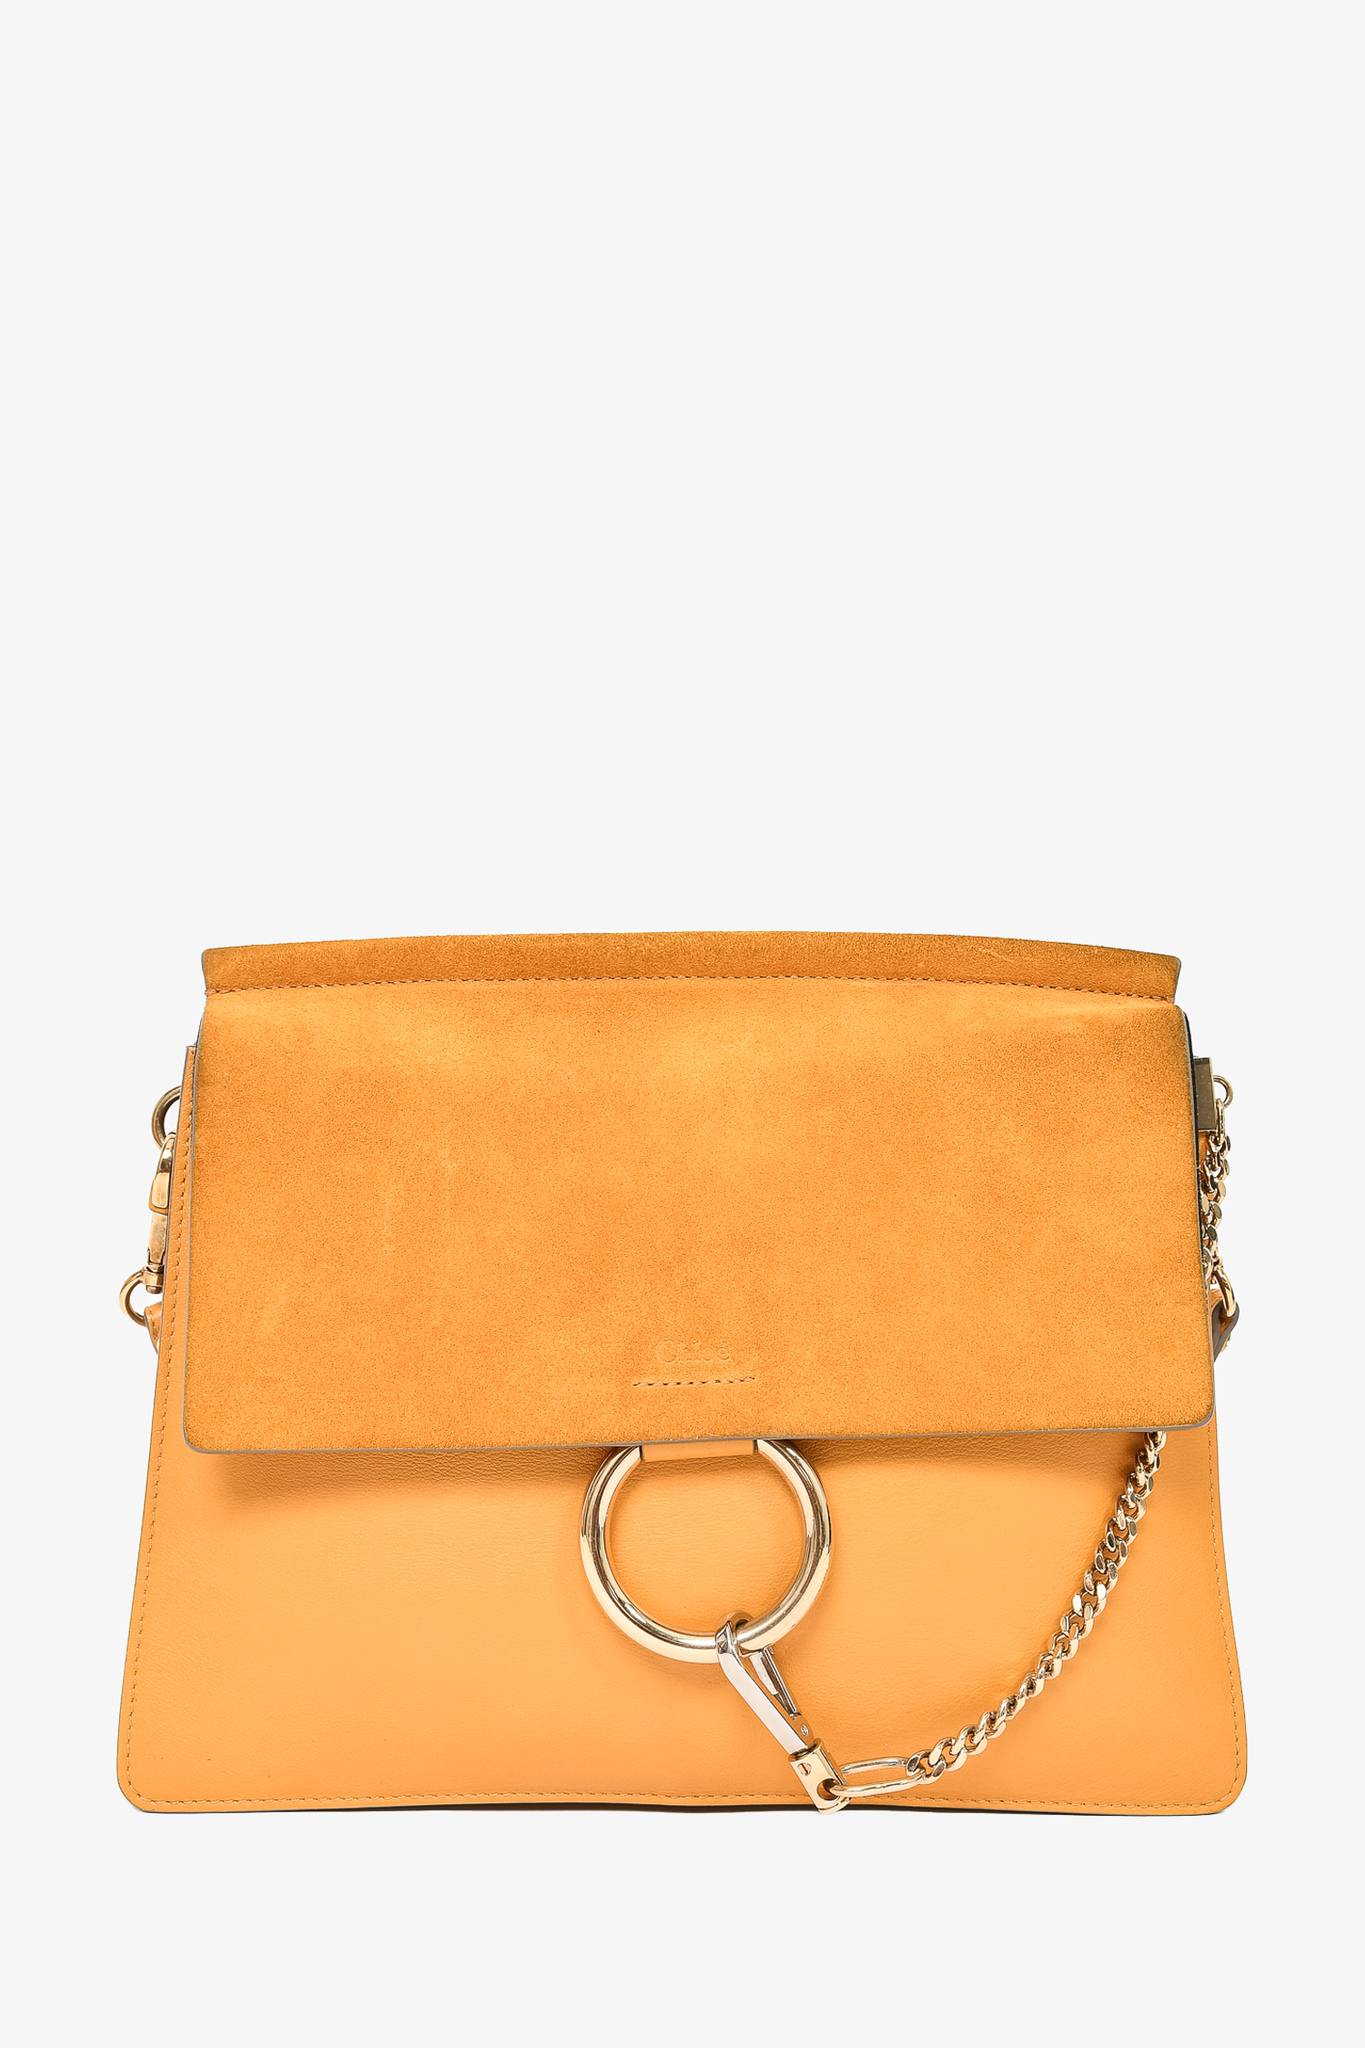 Chloe Yellow Leather/Suede Medium Faye Shoulder Bag – Mine & Yours